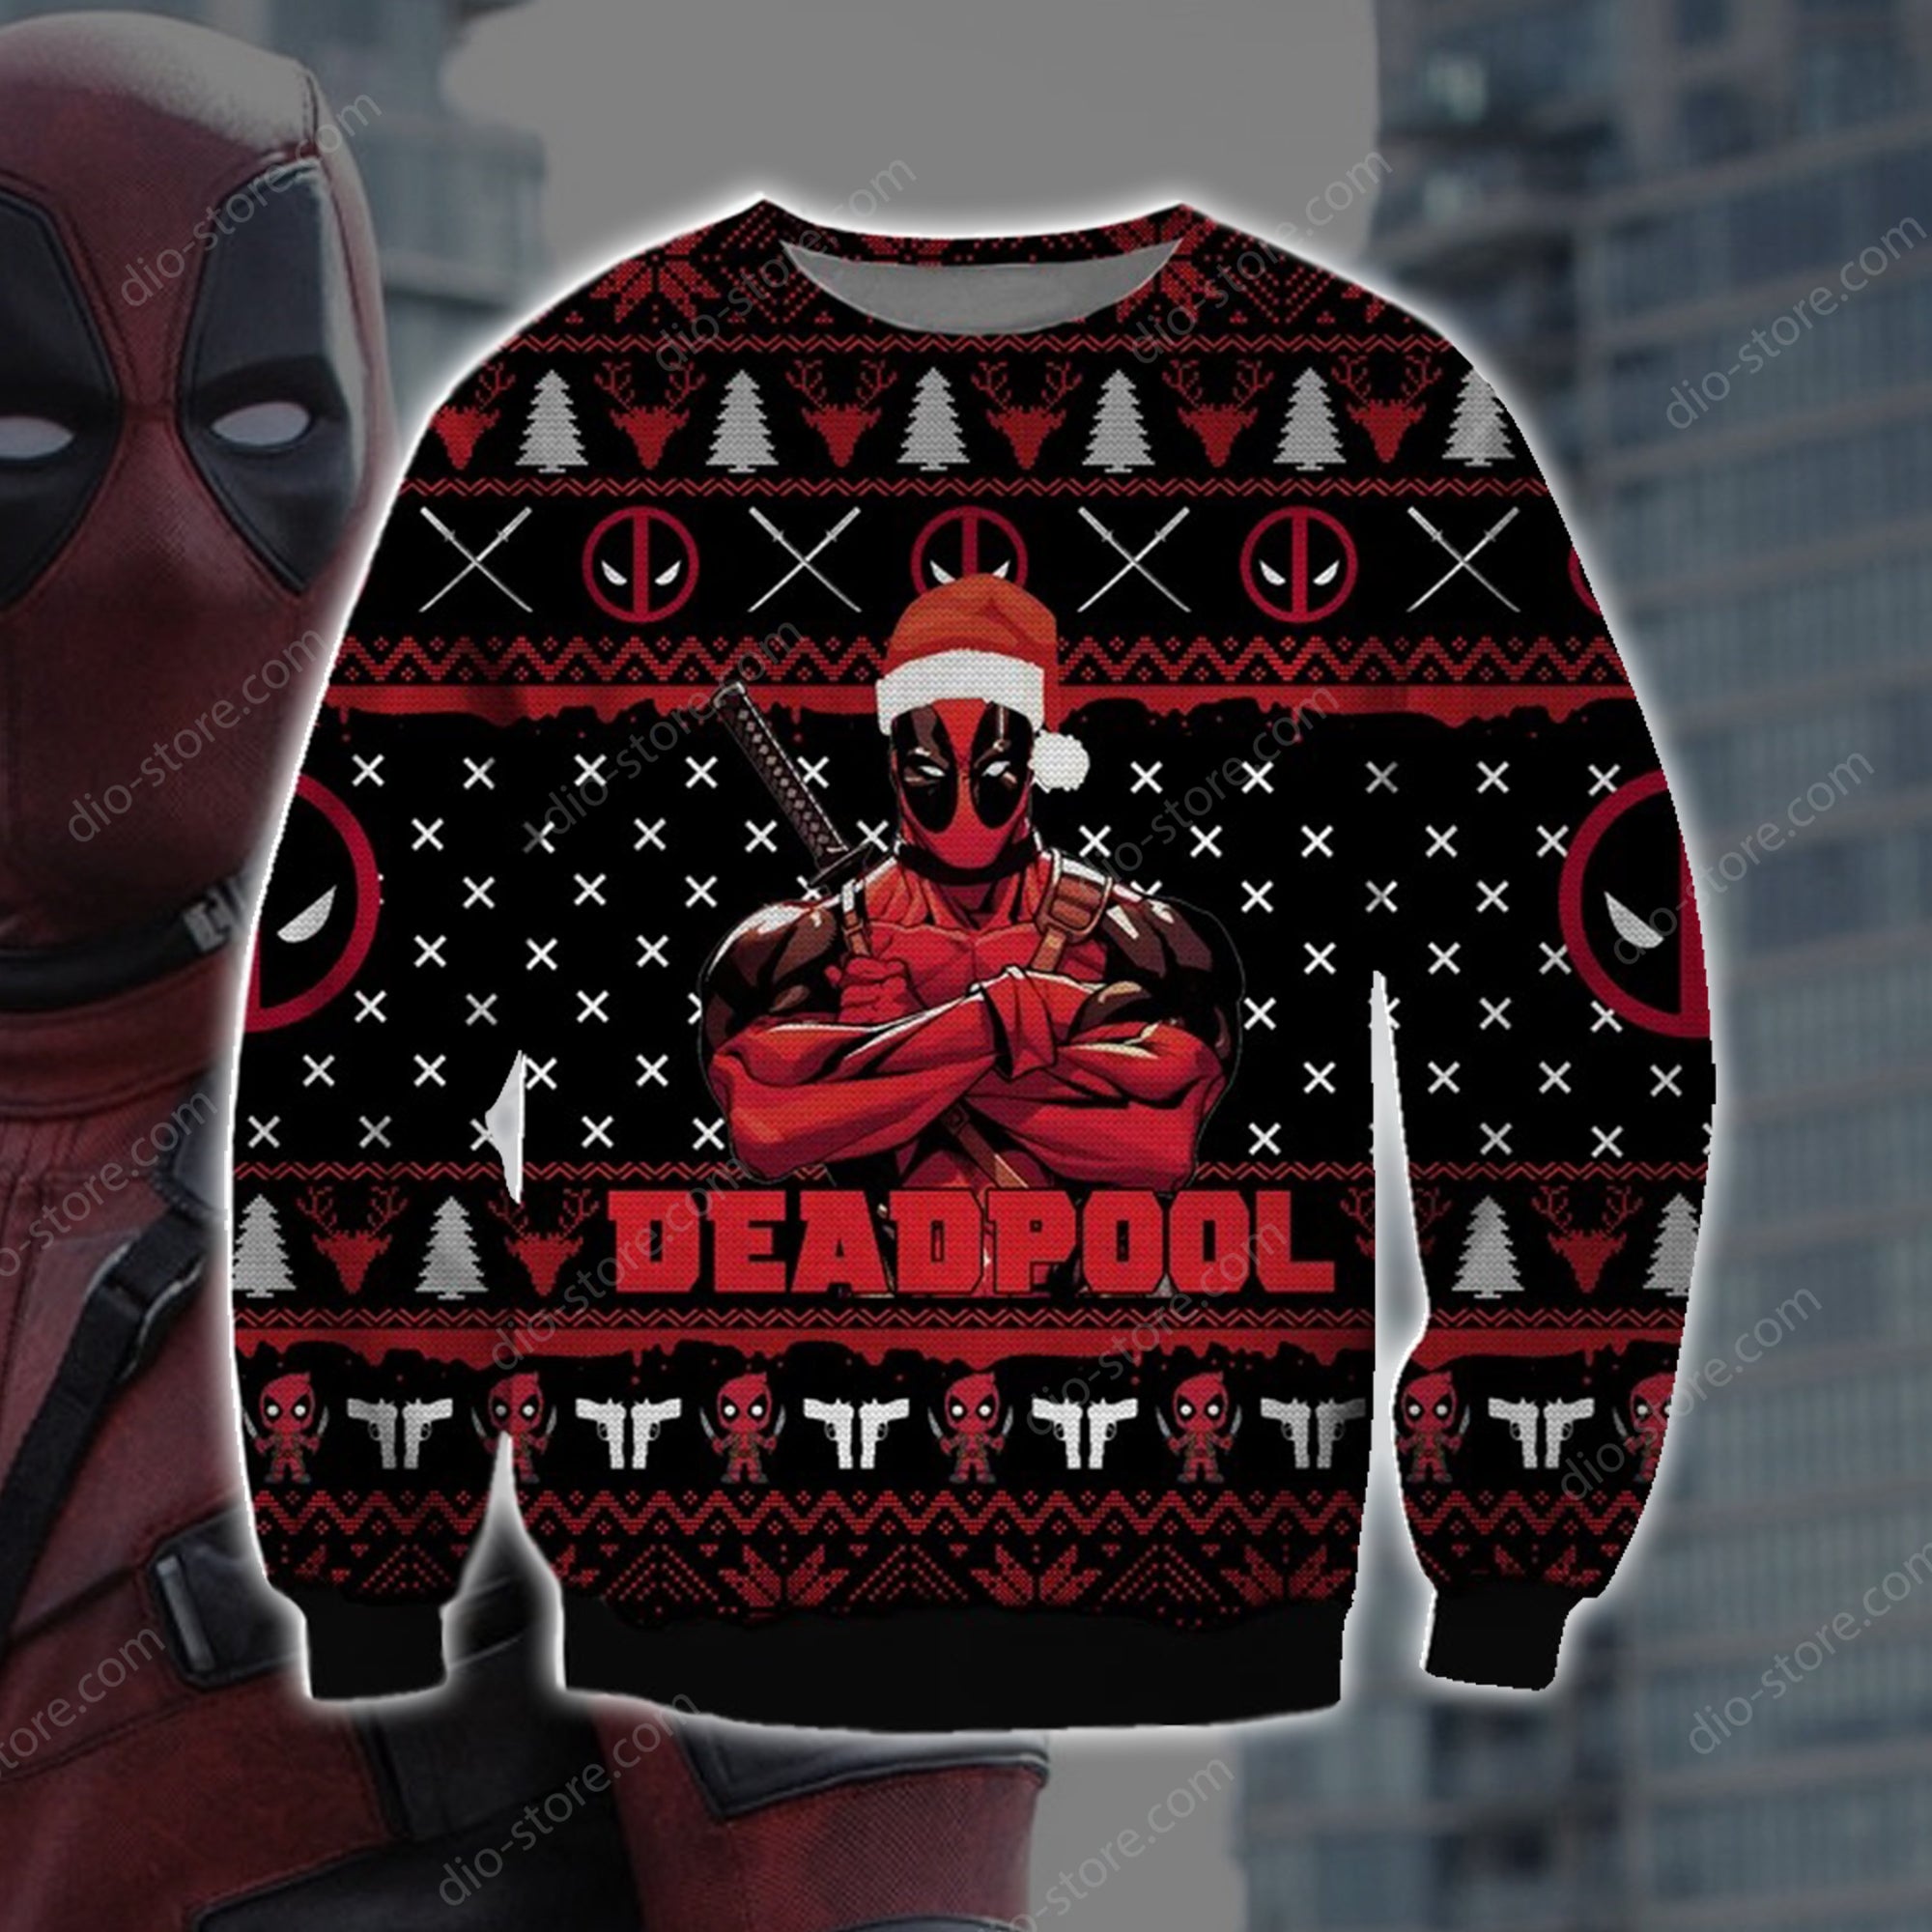 Deadpool Knitting Pattern 3D Print Ugly Christmas Sweater Hoodie All Over Printed Cint10603